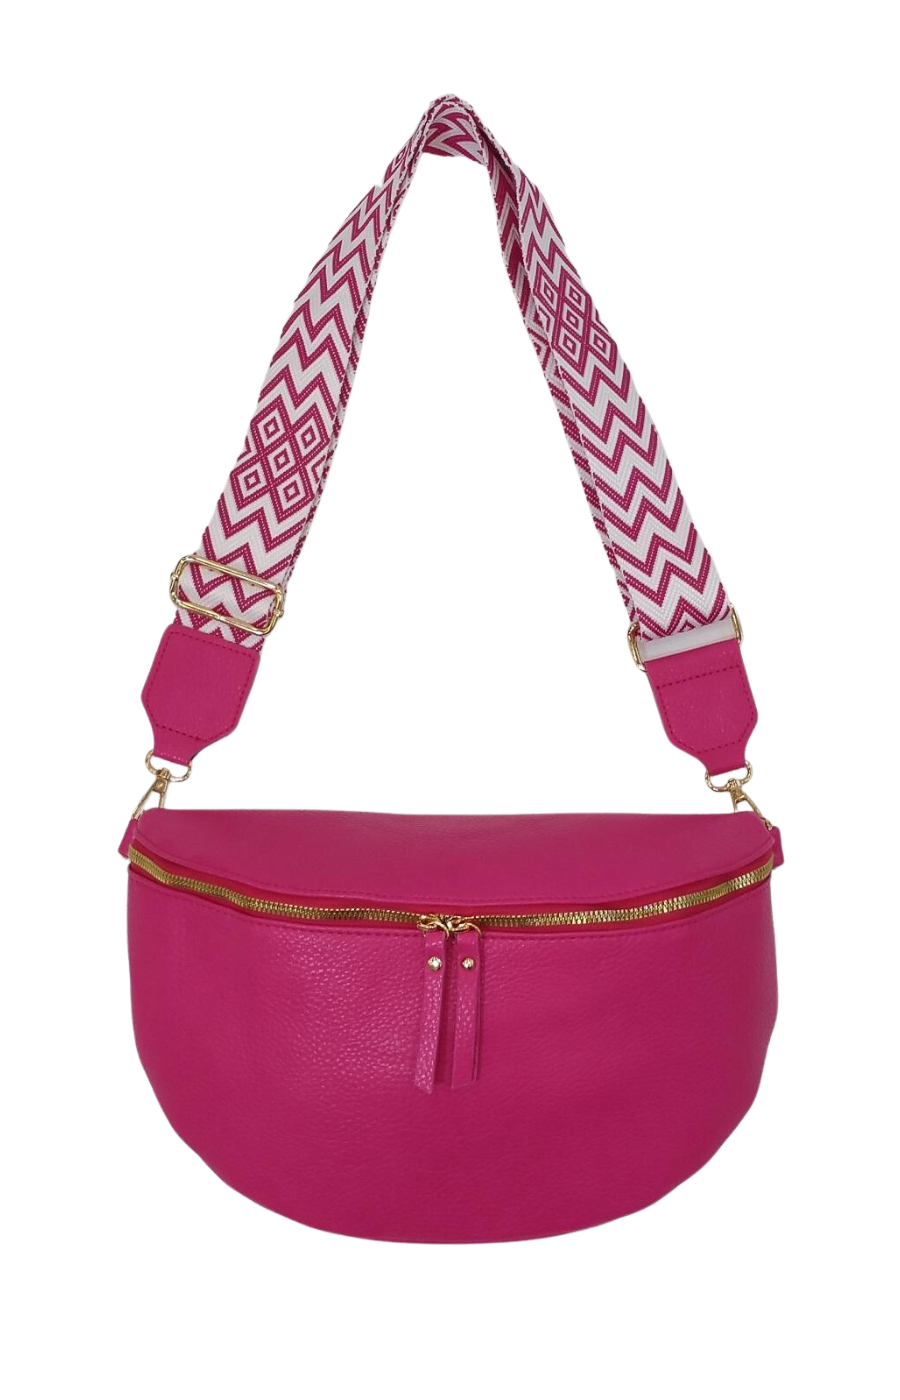 Naoise Cross Body Bag in Pink